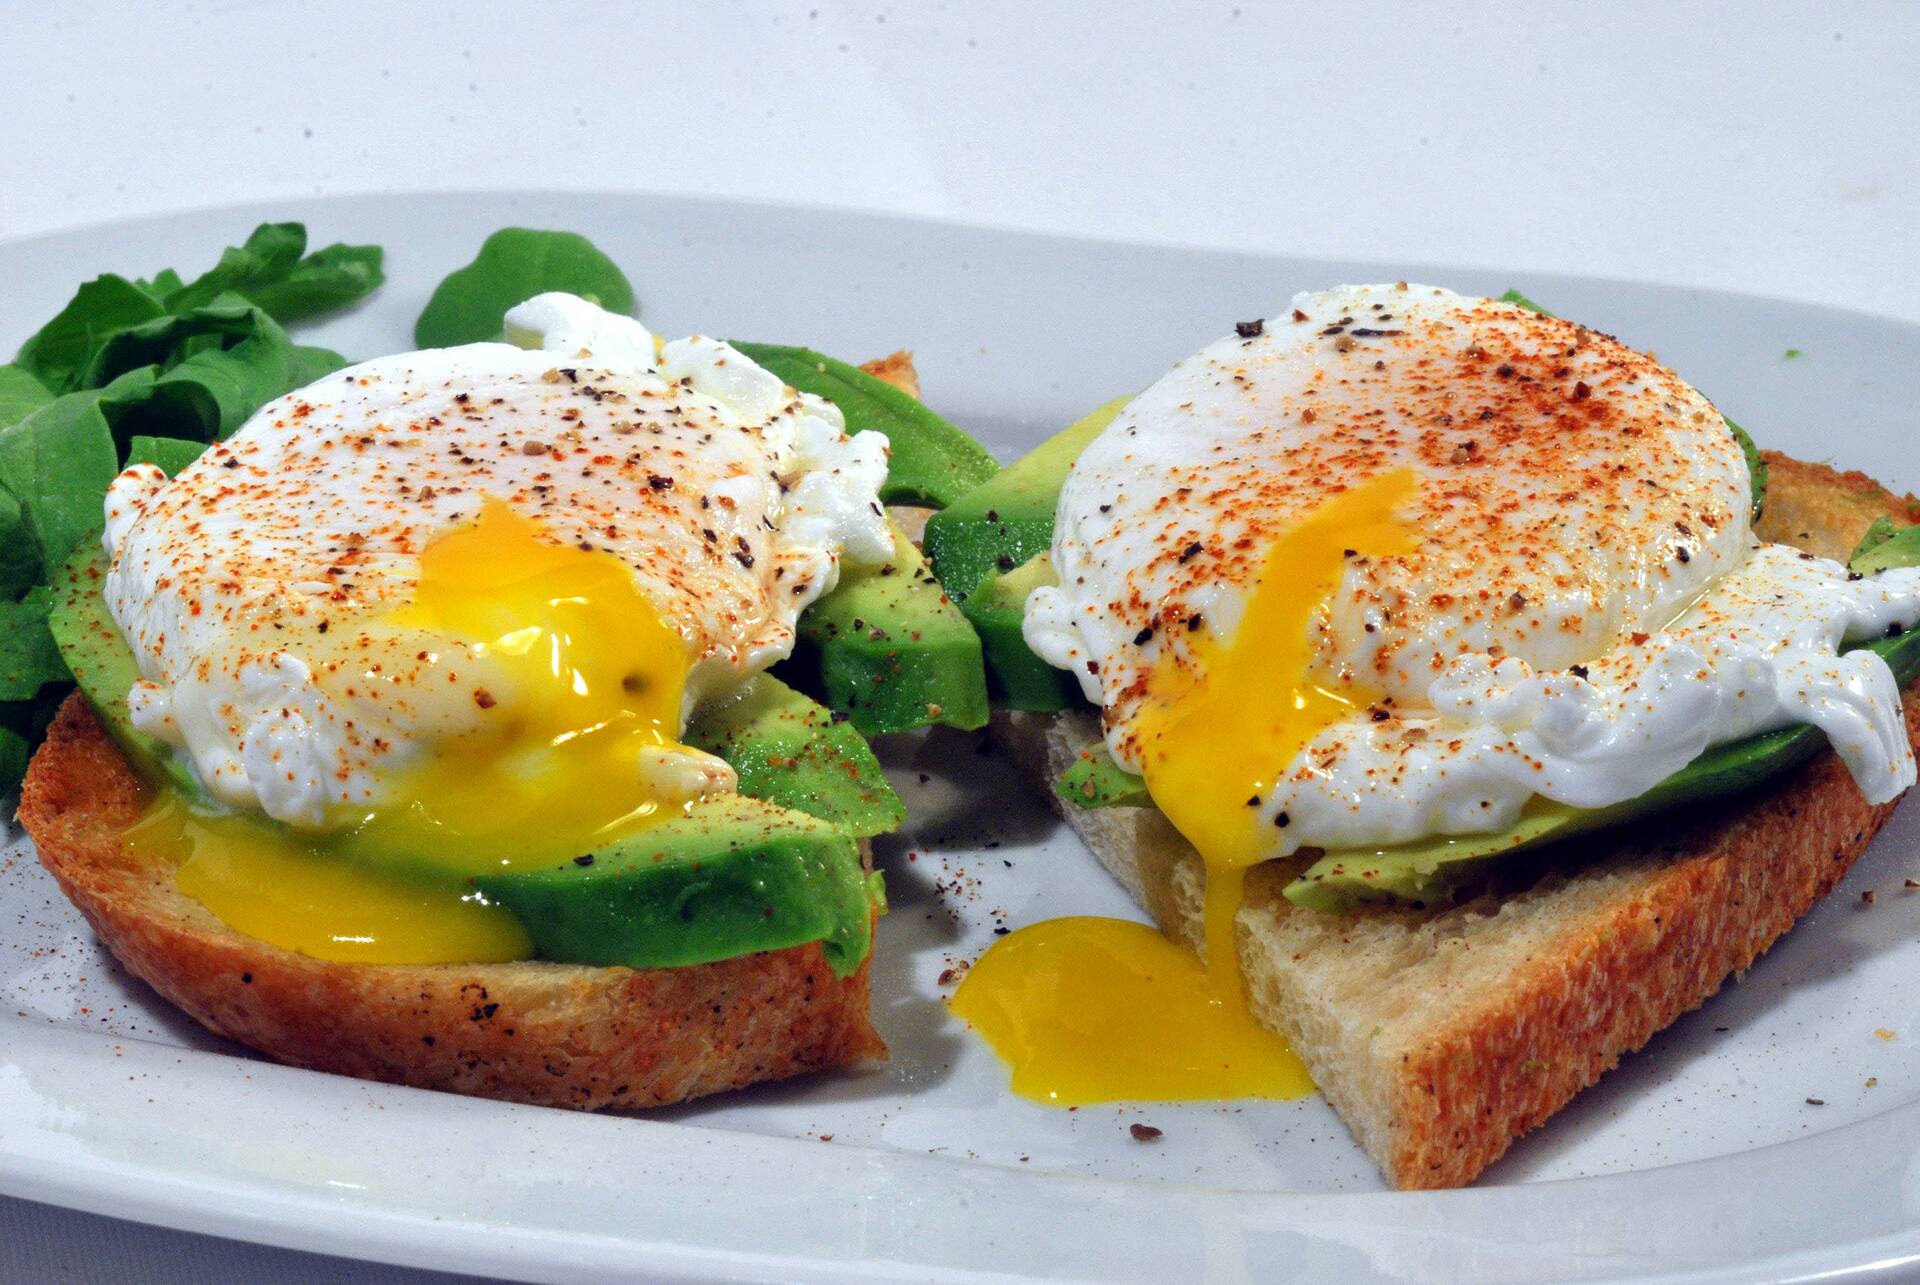 Avocado toast with an egg on top